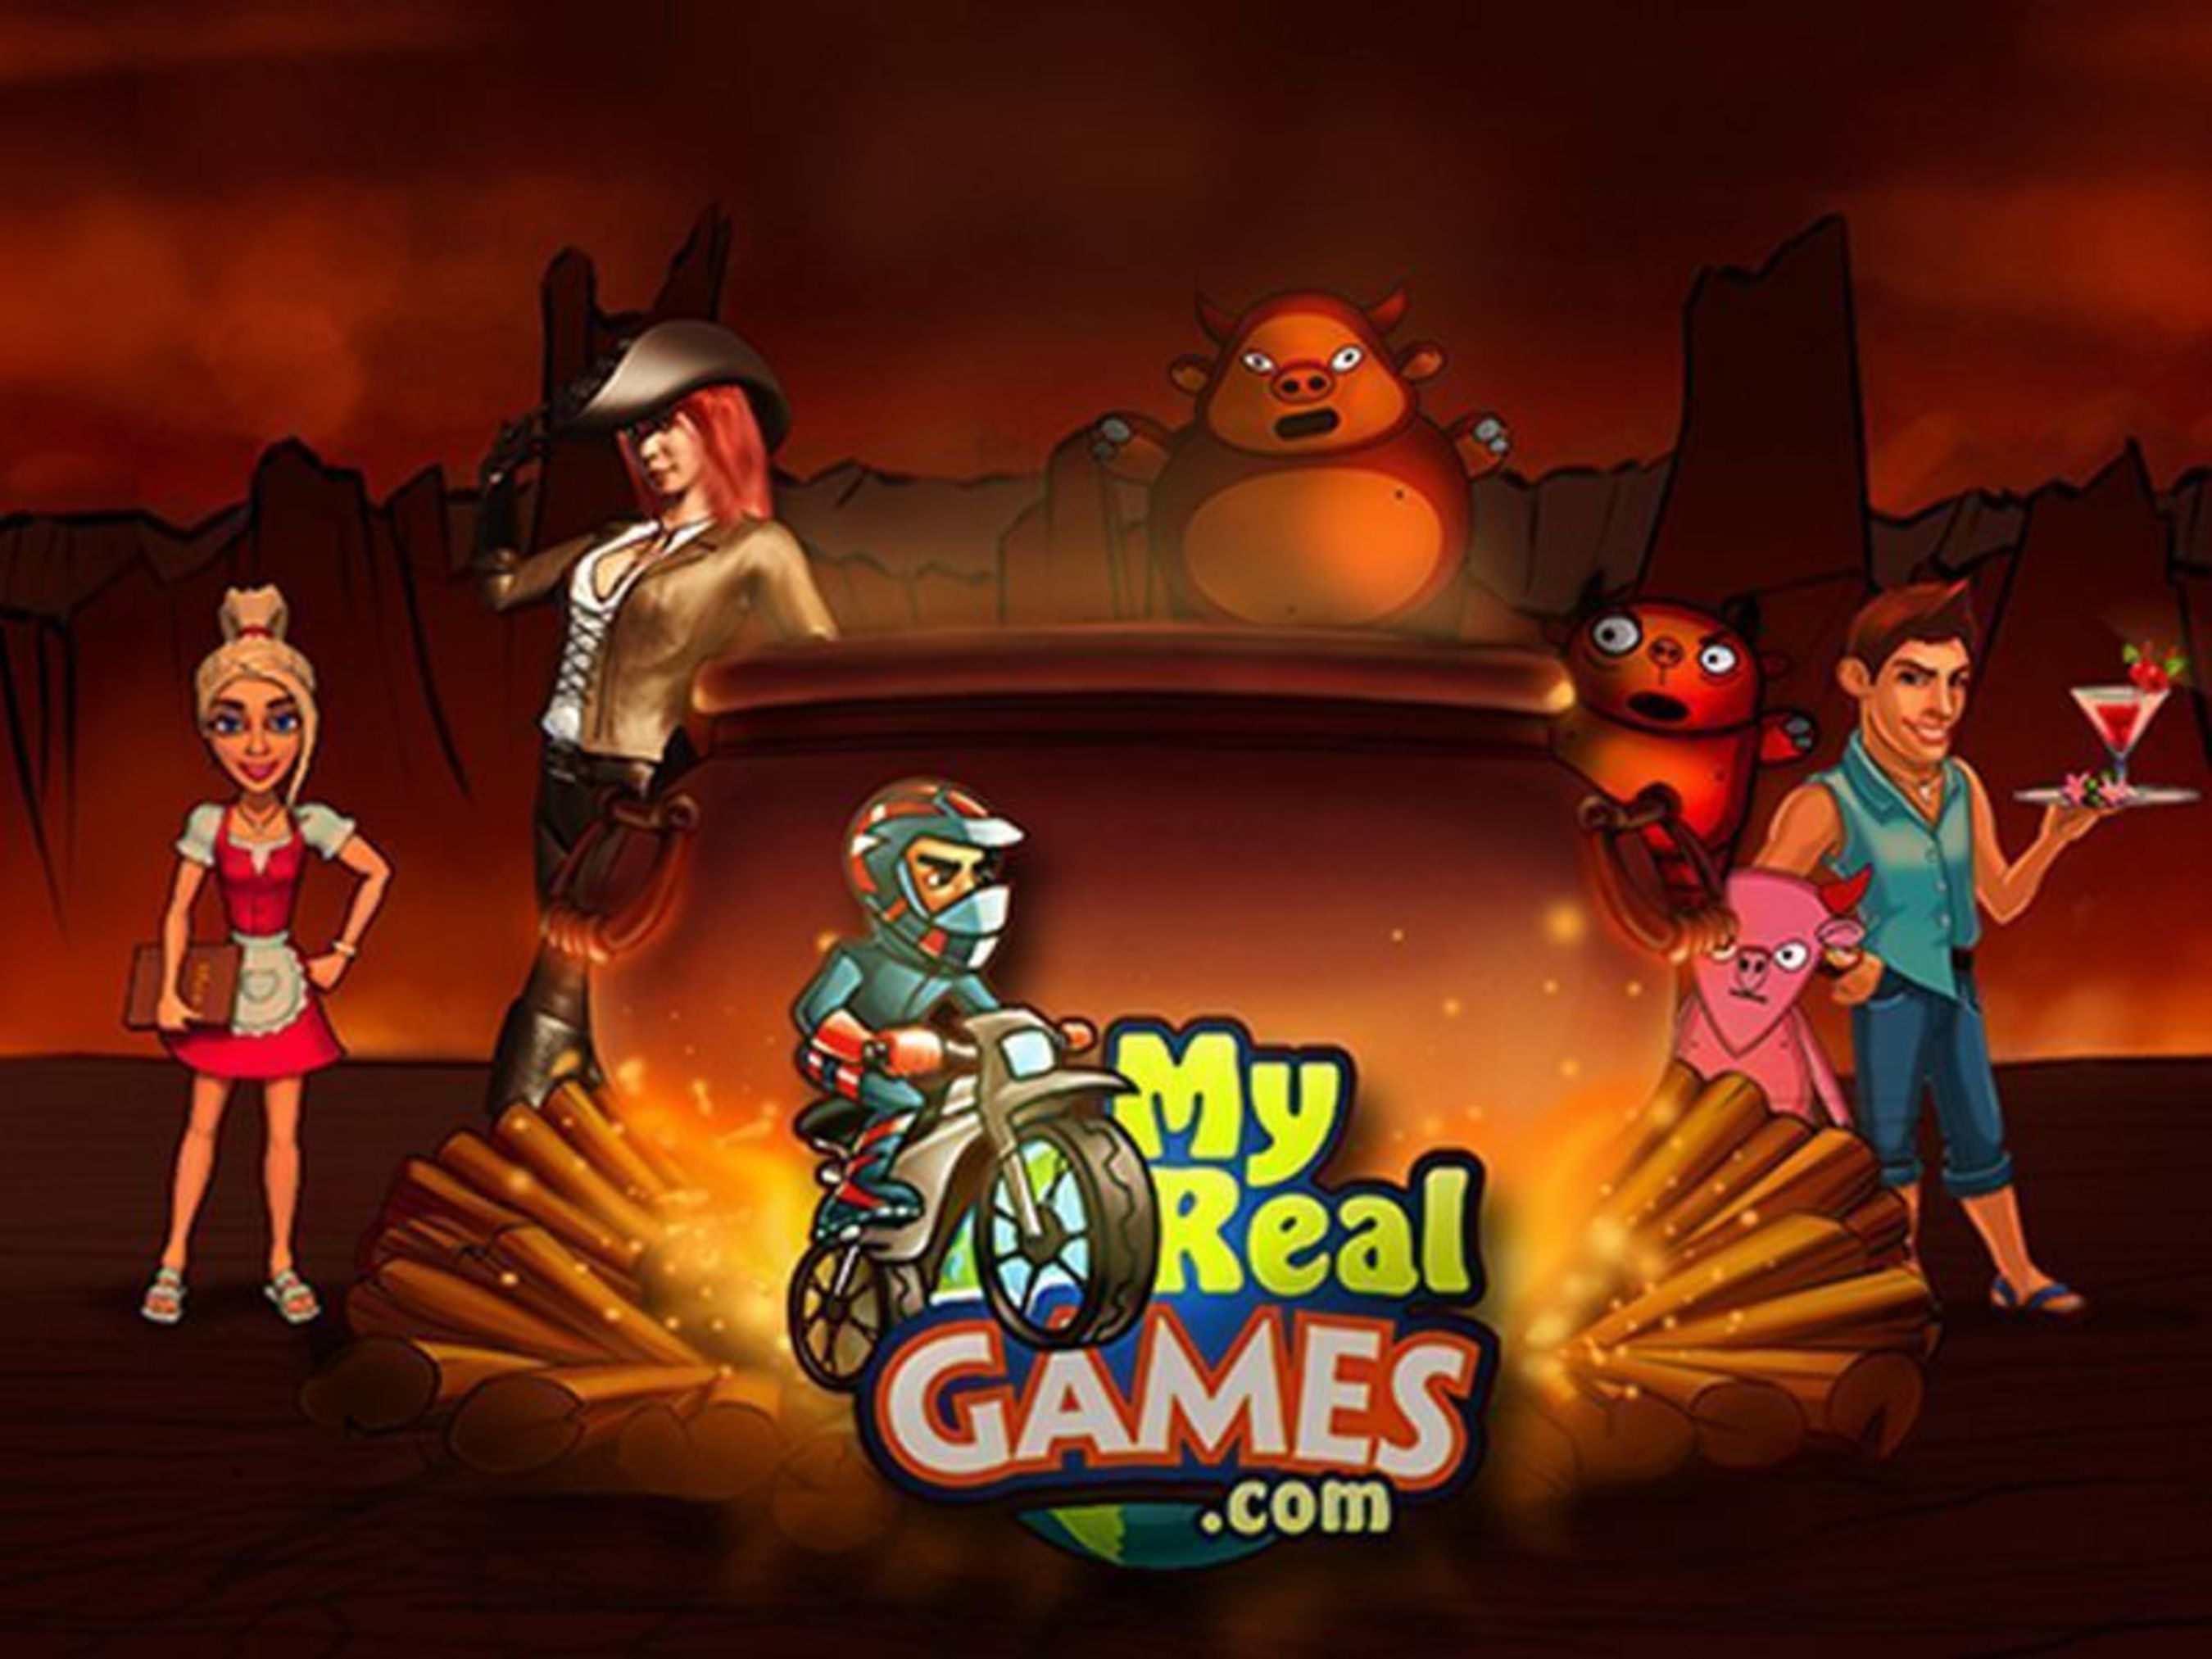 Free Games Download Site My Real Games Ends 2012 on a High with App Store  Approval